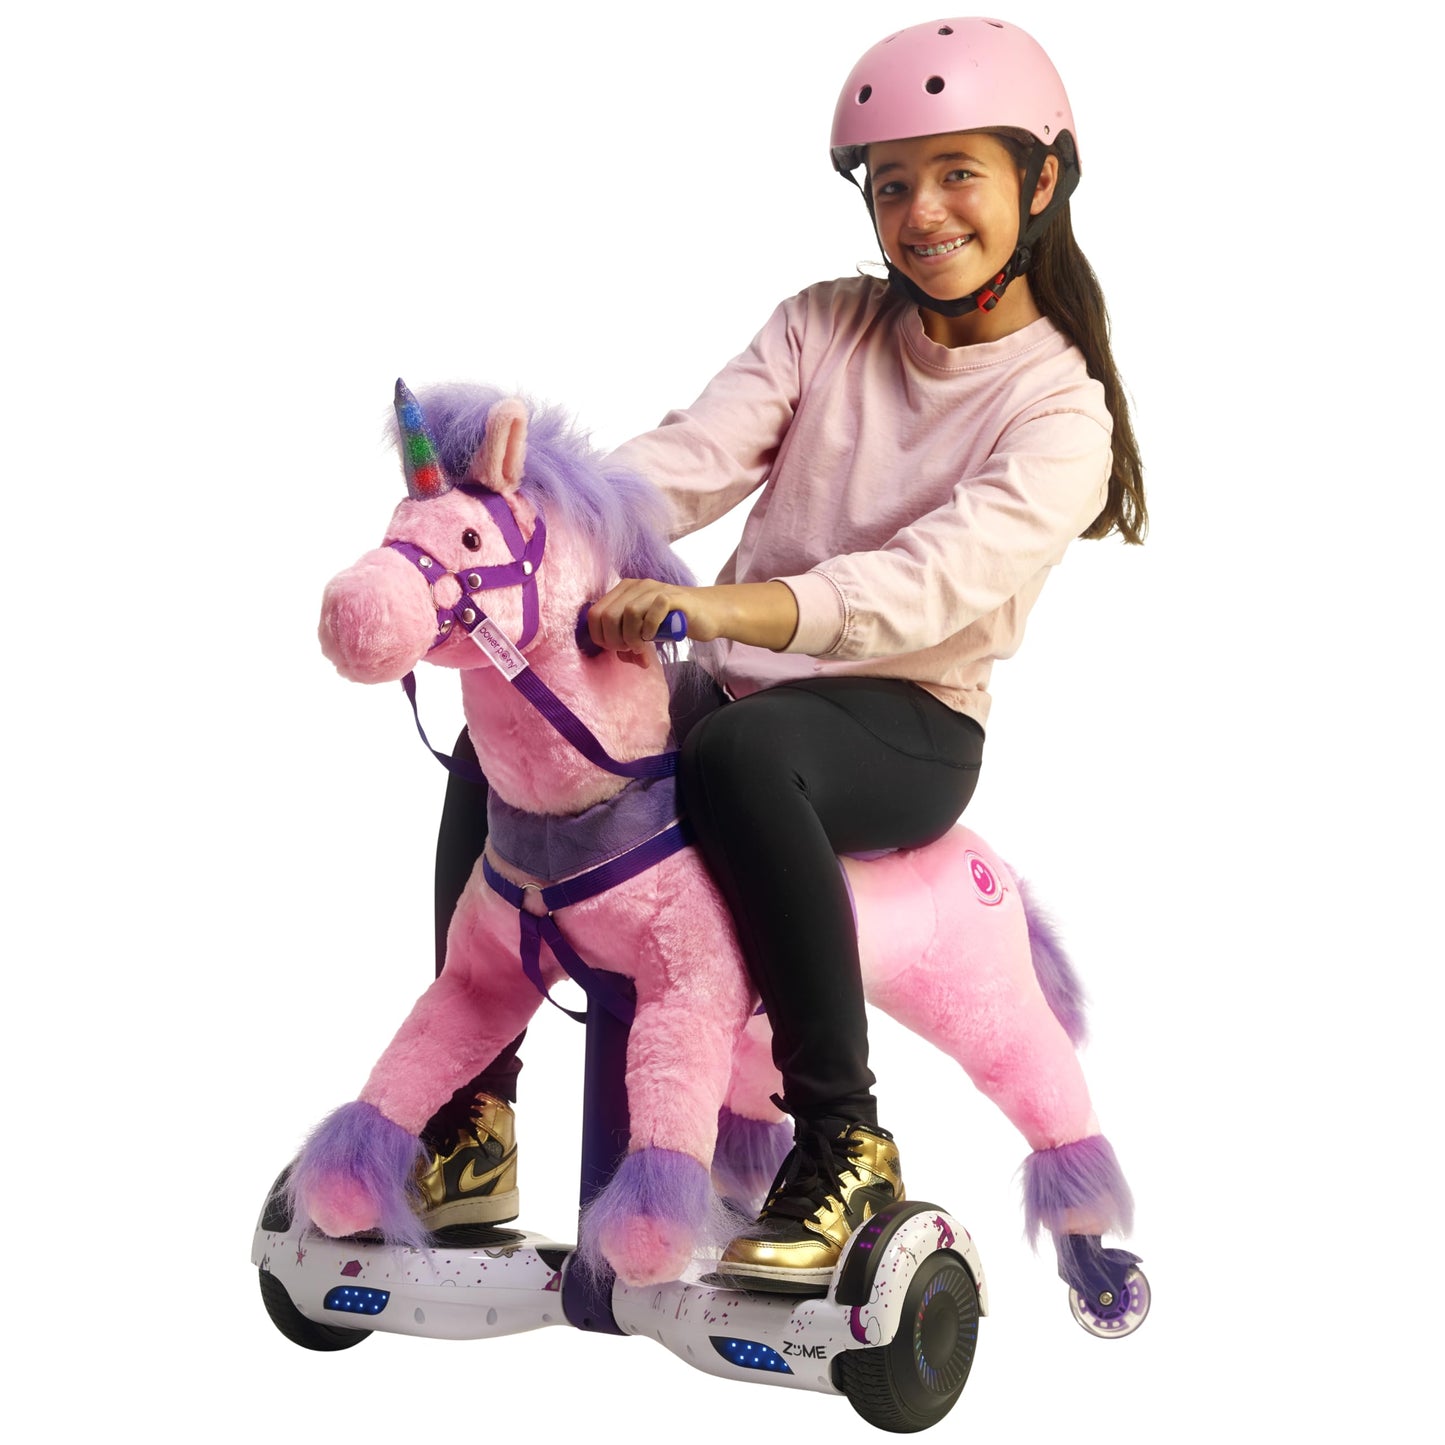 Powerpony Ride On Unicorn Hoverboard - Rideable Unicorn Ride On Toy for Girls and Boys - Power Pony Ride On Toy Pony - Princess